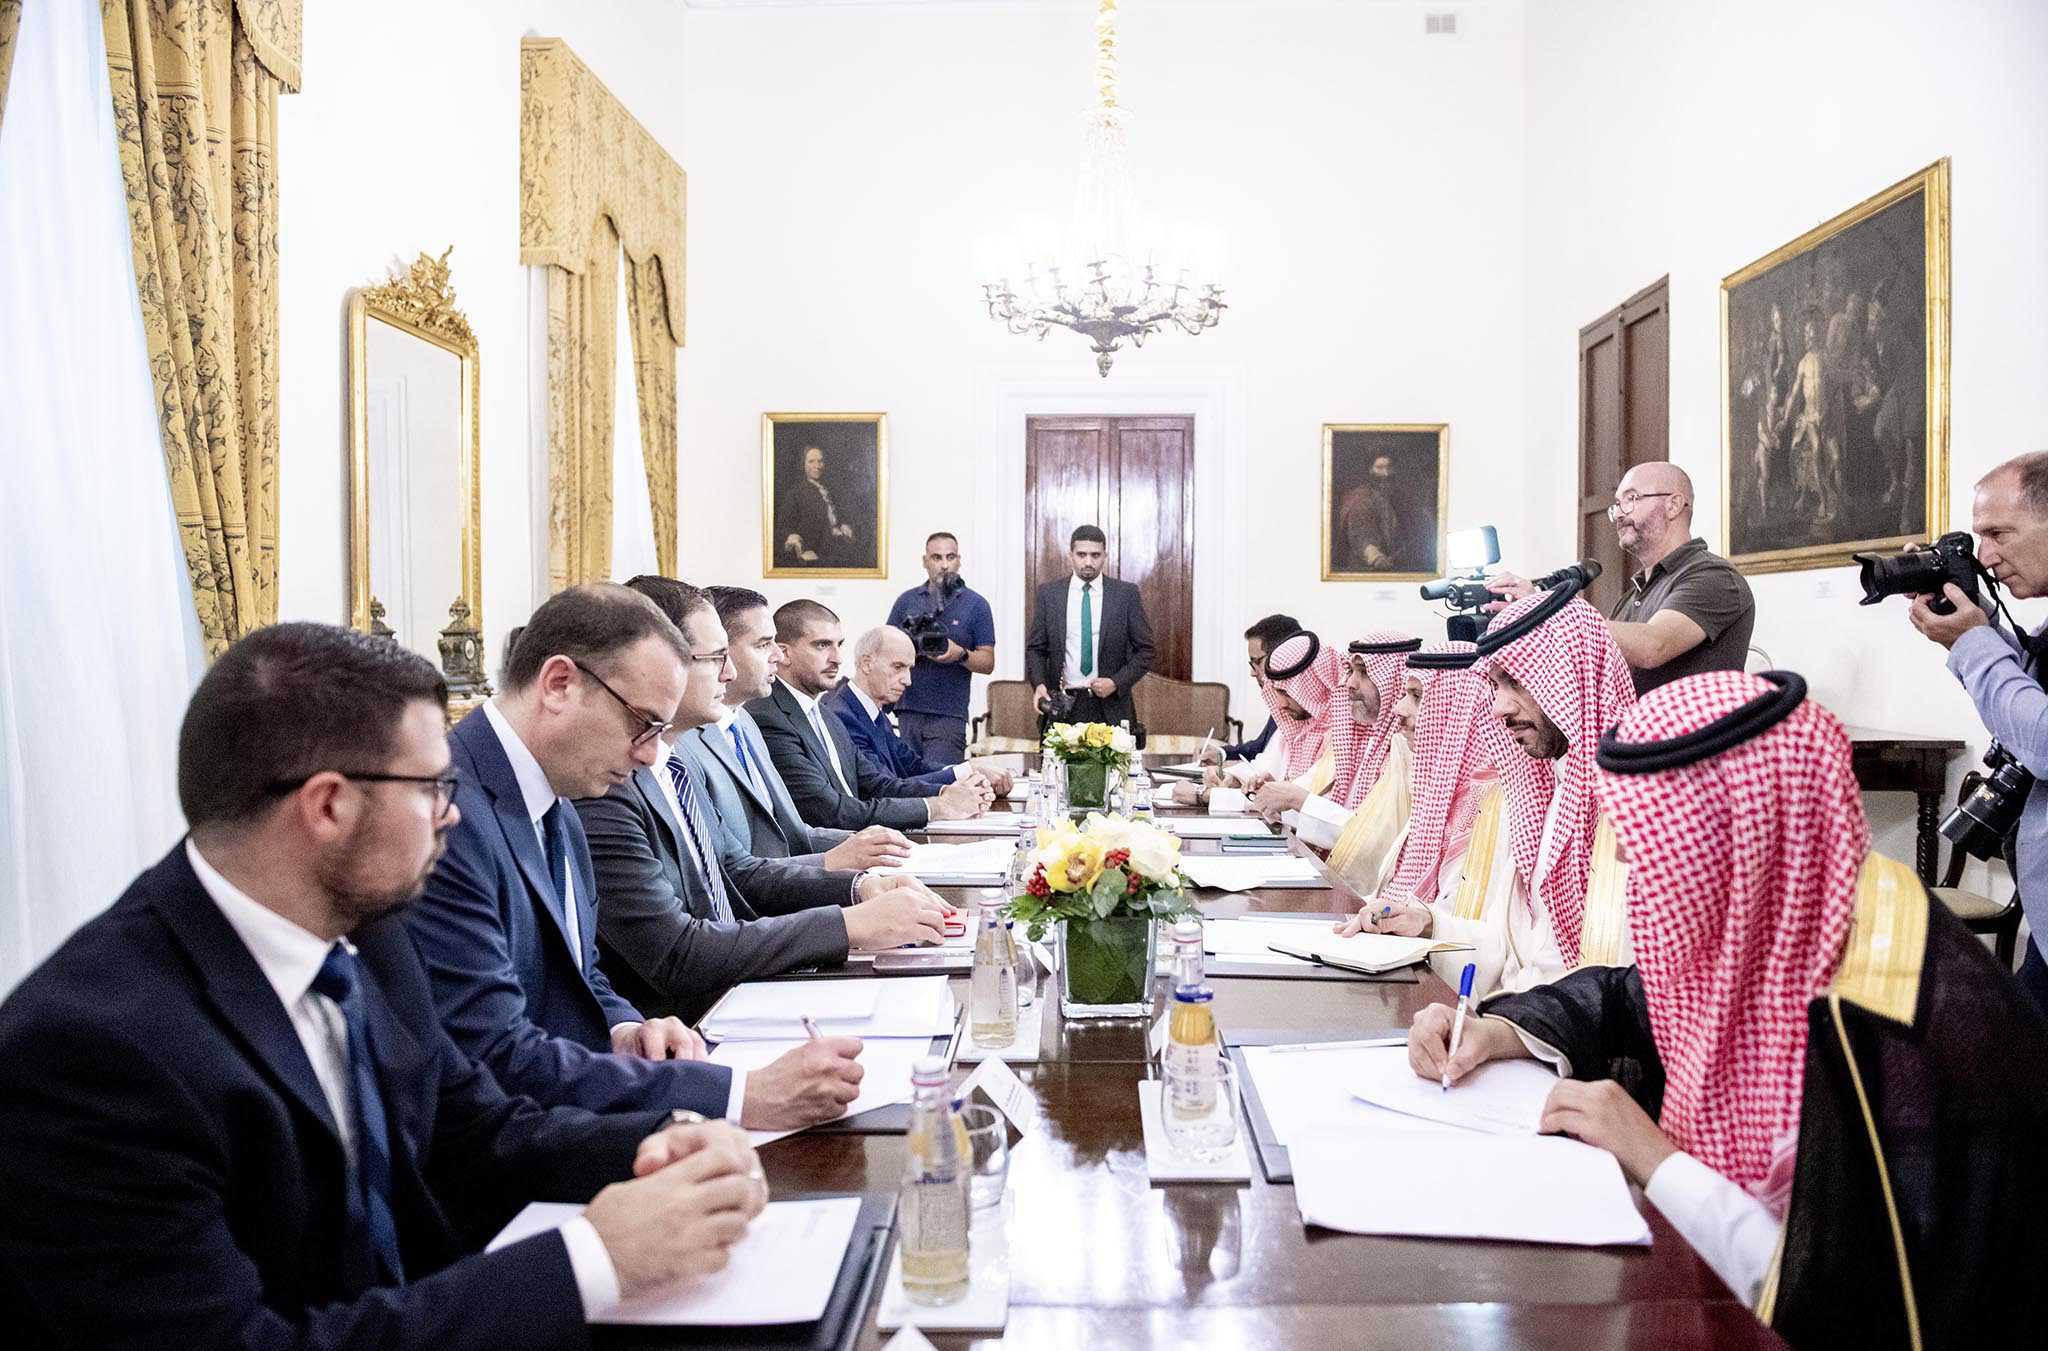 Malta and Saudi Arabia agree to strengthen trade and commercial links during Saudi Foreign Minister’s visit